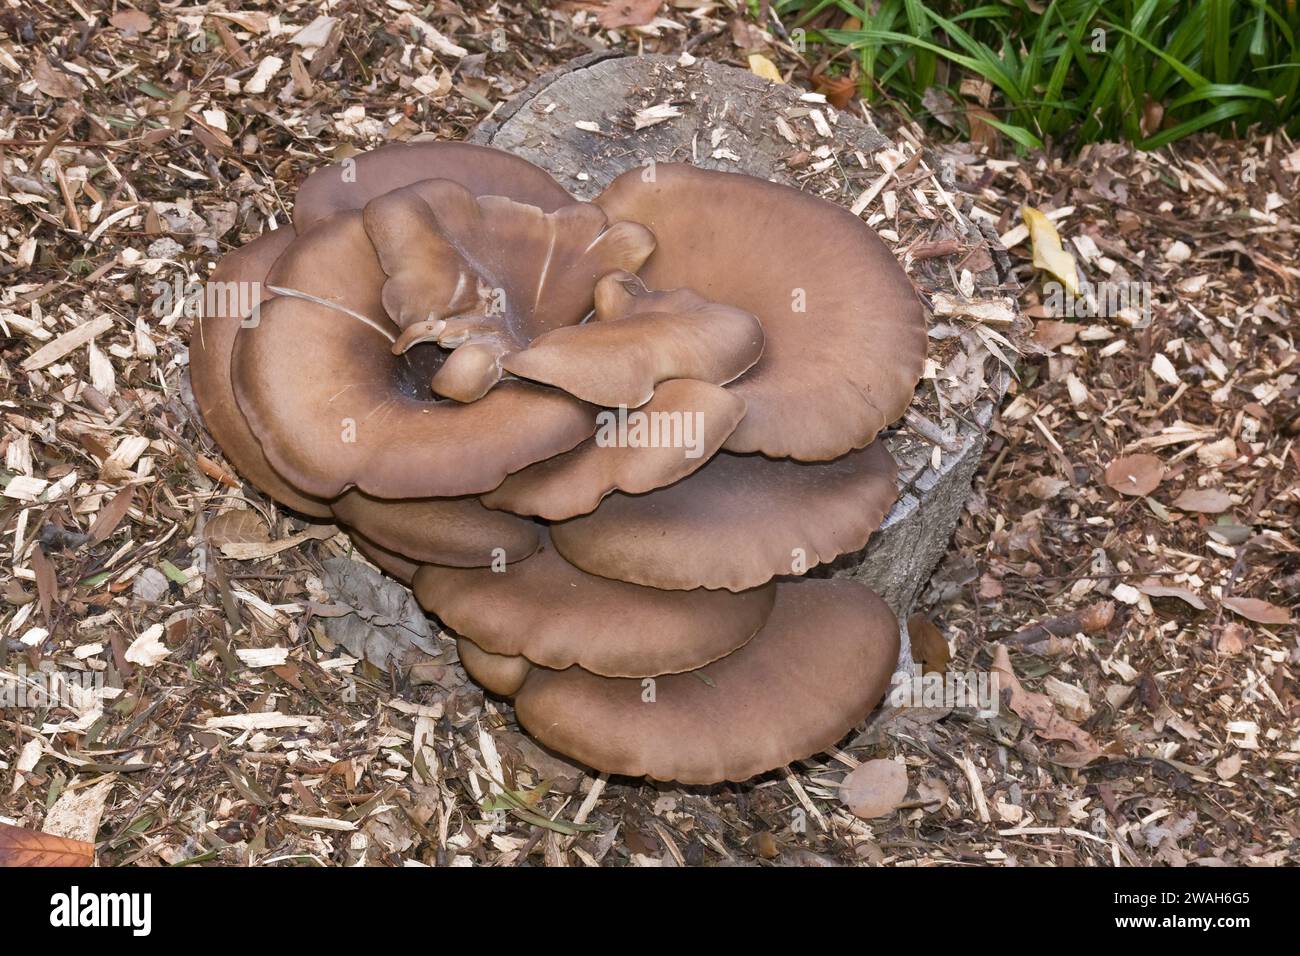 close-up picture of a cluster of giant brown mushrooms grown outdoor on a piece of tree stump in a garden Stock Photo